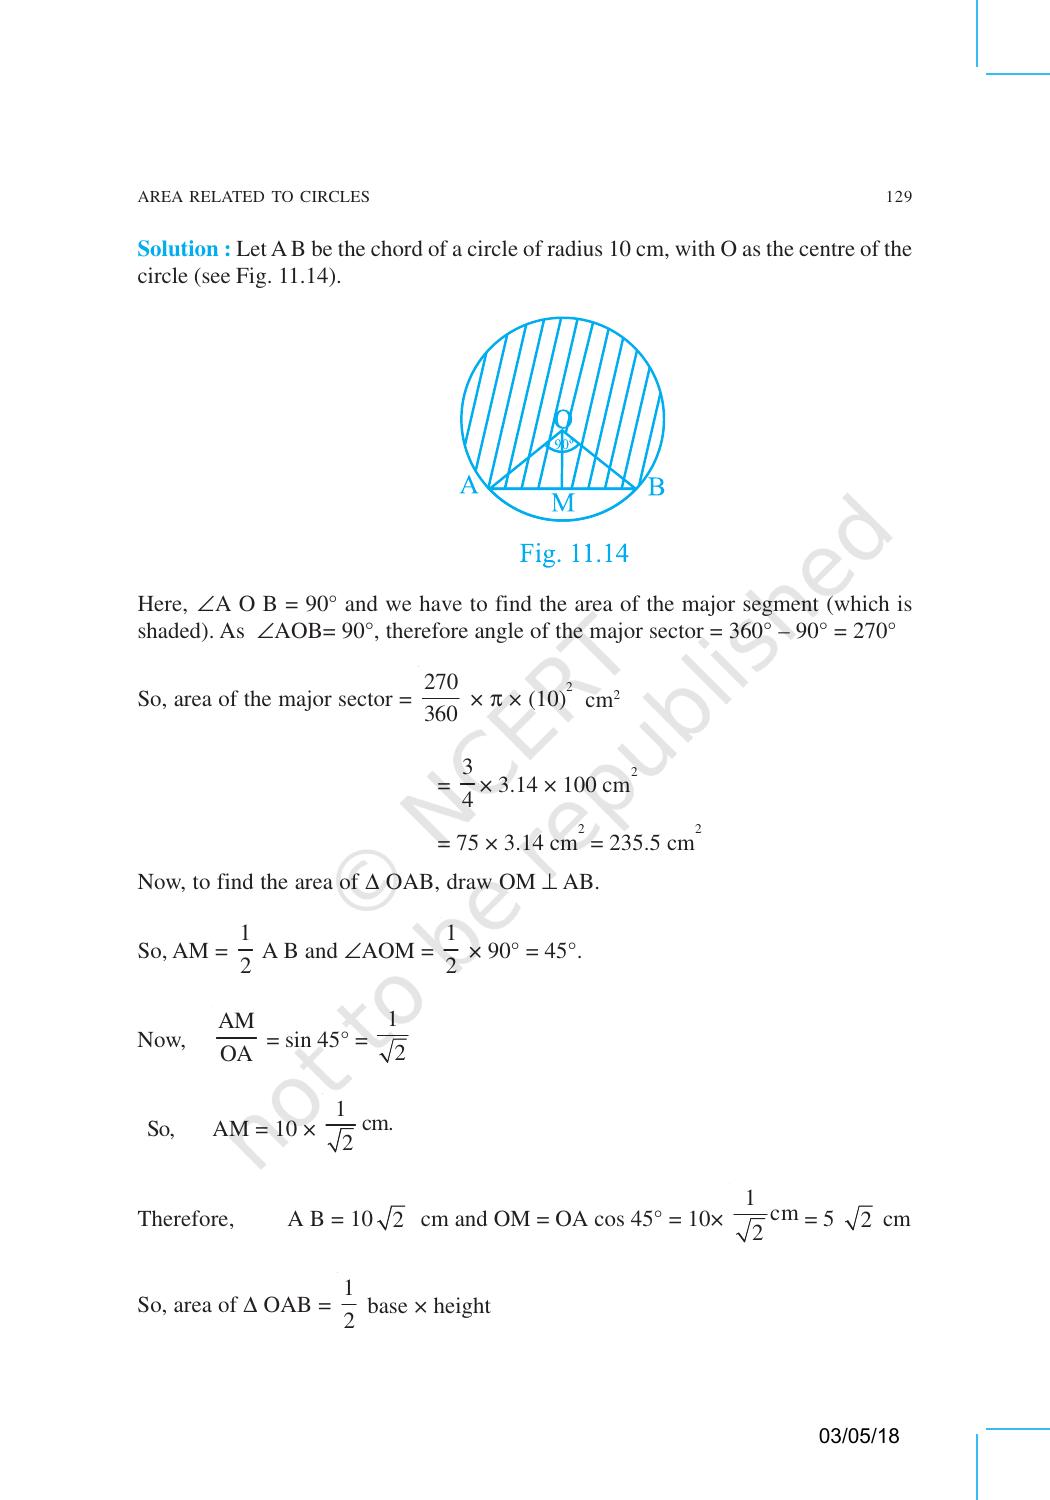 NCERT Exemplar Book for Class 10 Maths: Chapter 11 Areas related to Circles - Page 11